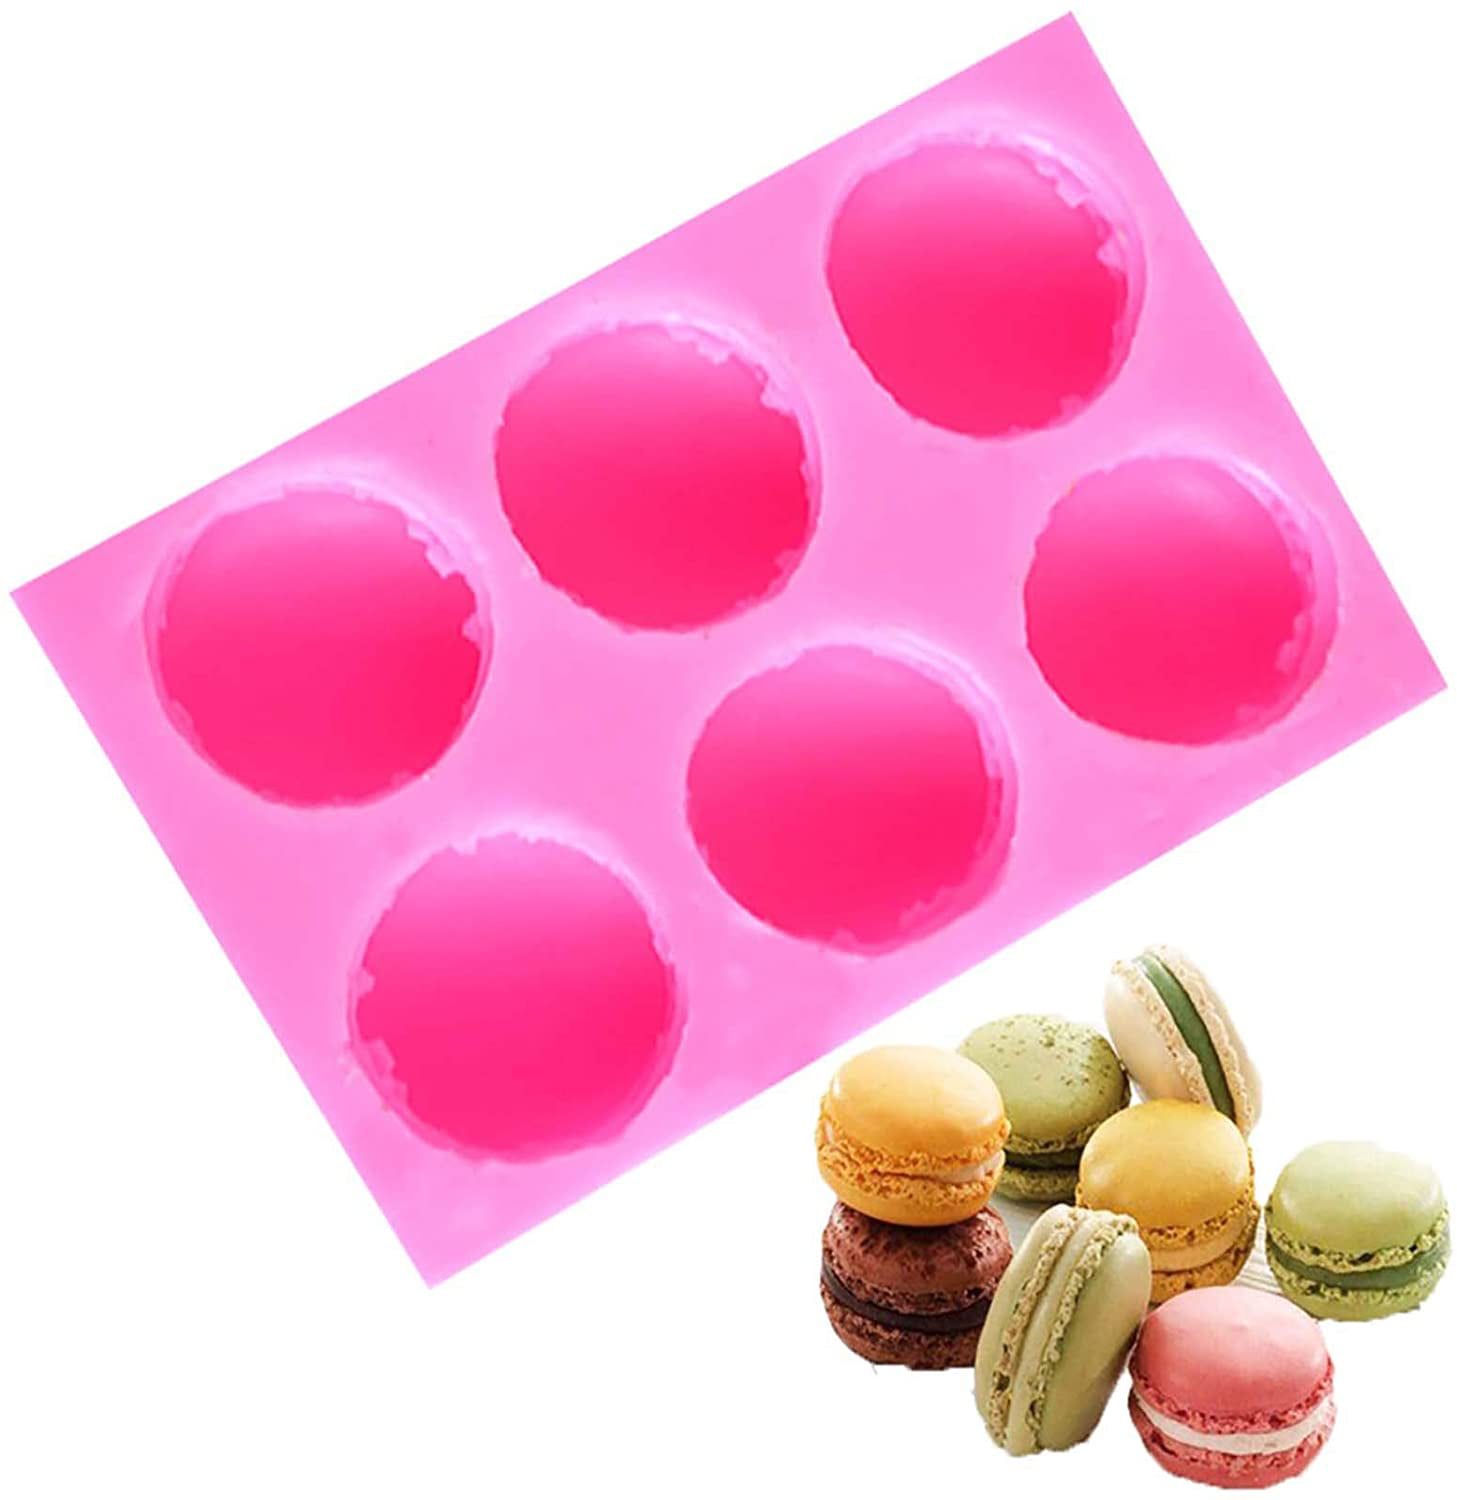 Silicone Fondant Candy Chocolate Cookies Cake Decorating Baking Mold Soap Moulds 